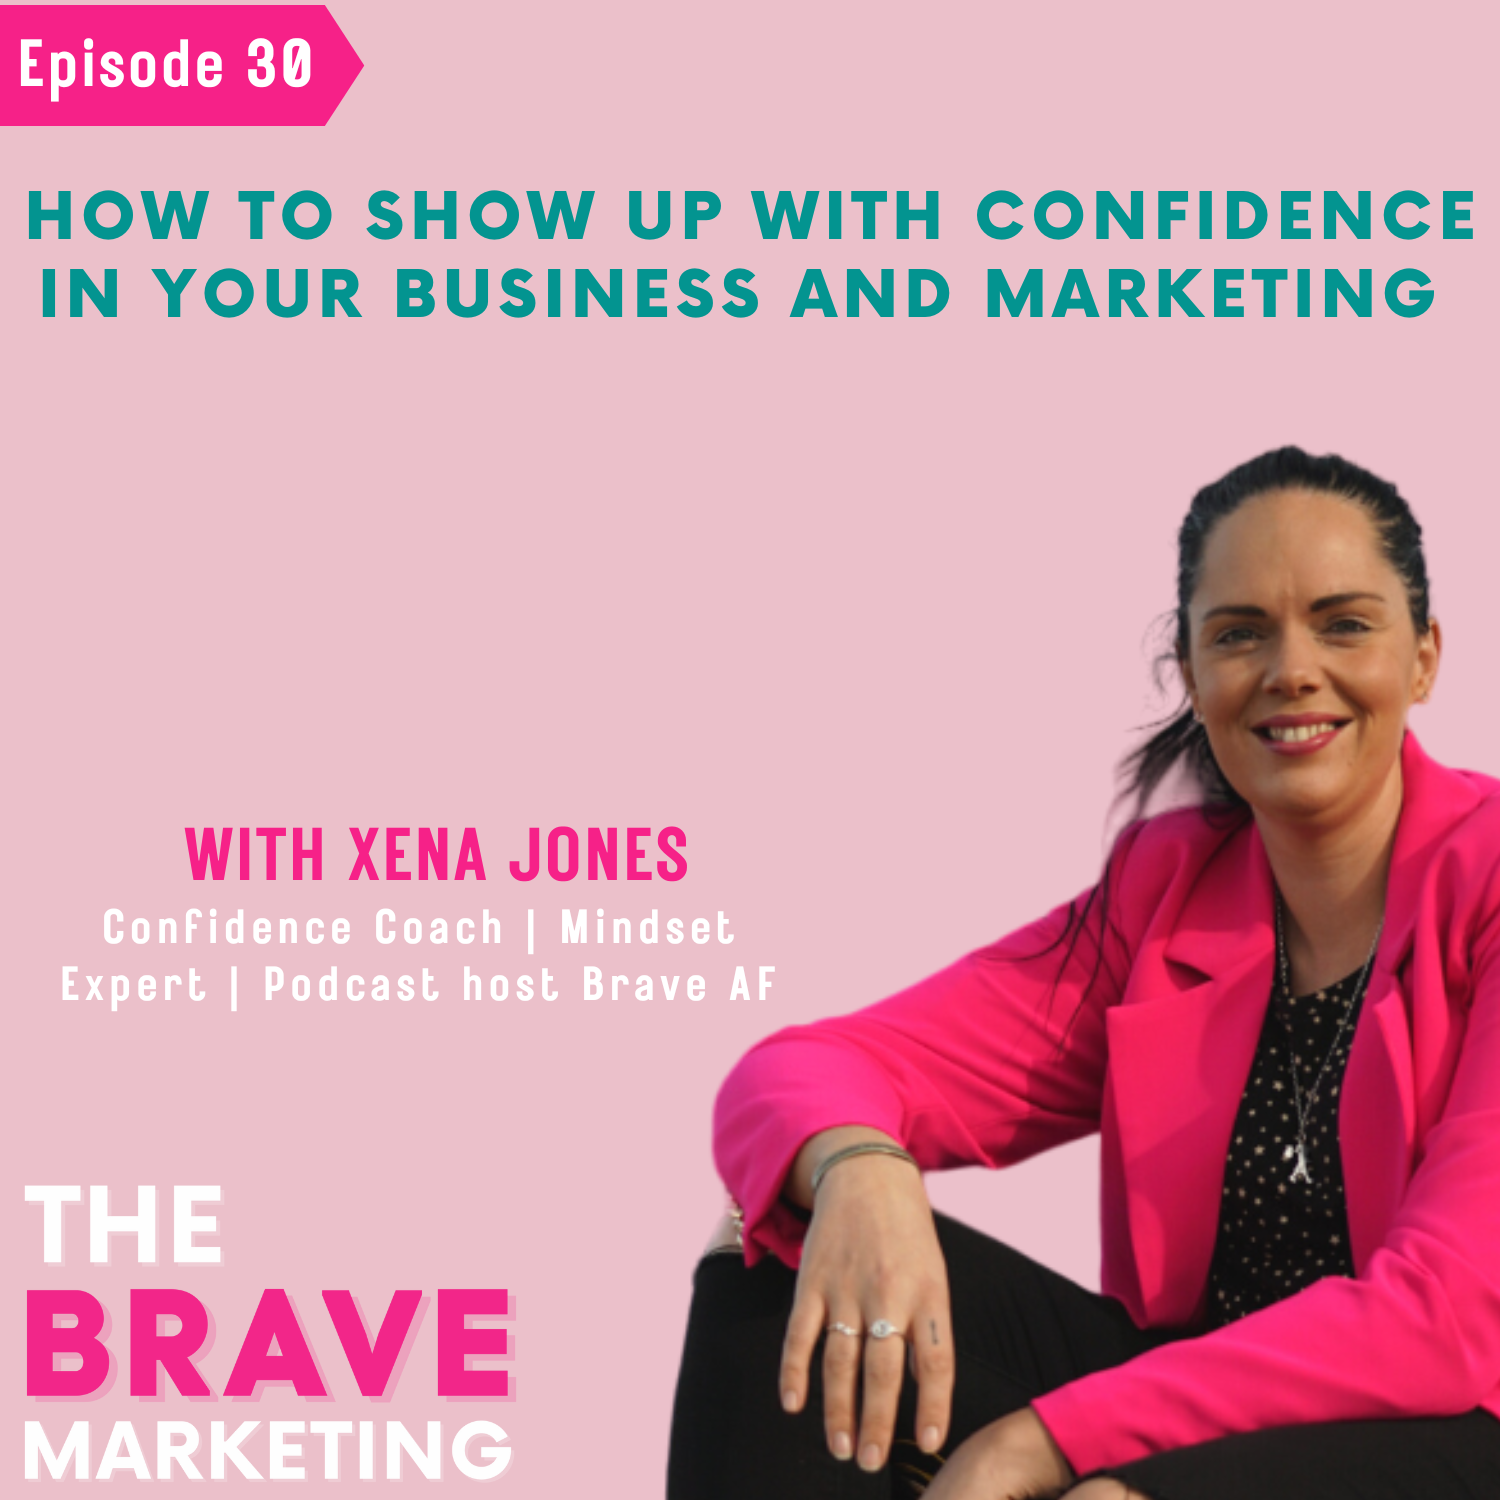 How to show up with confidence in your business and marketing with Xena Jones